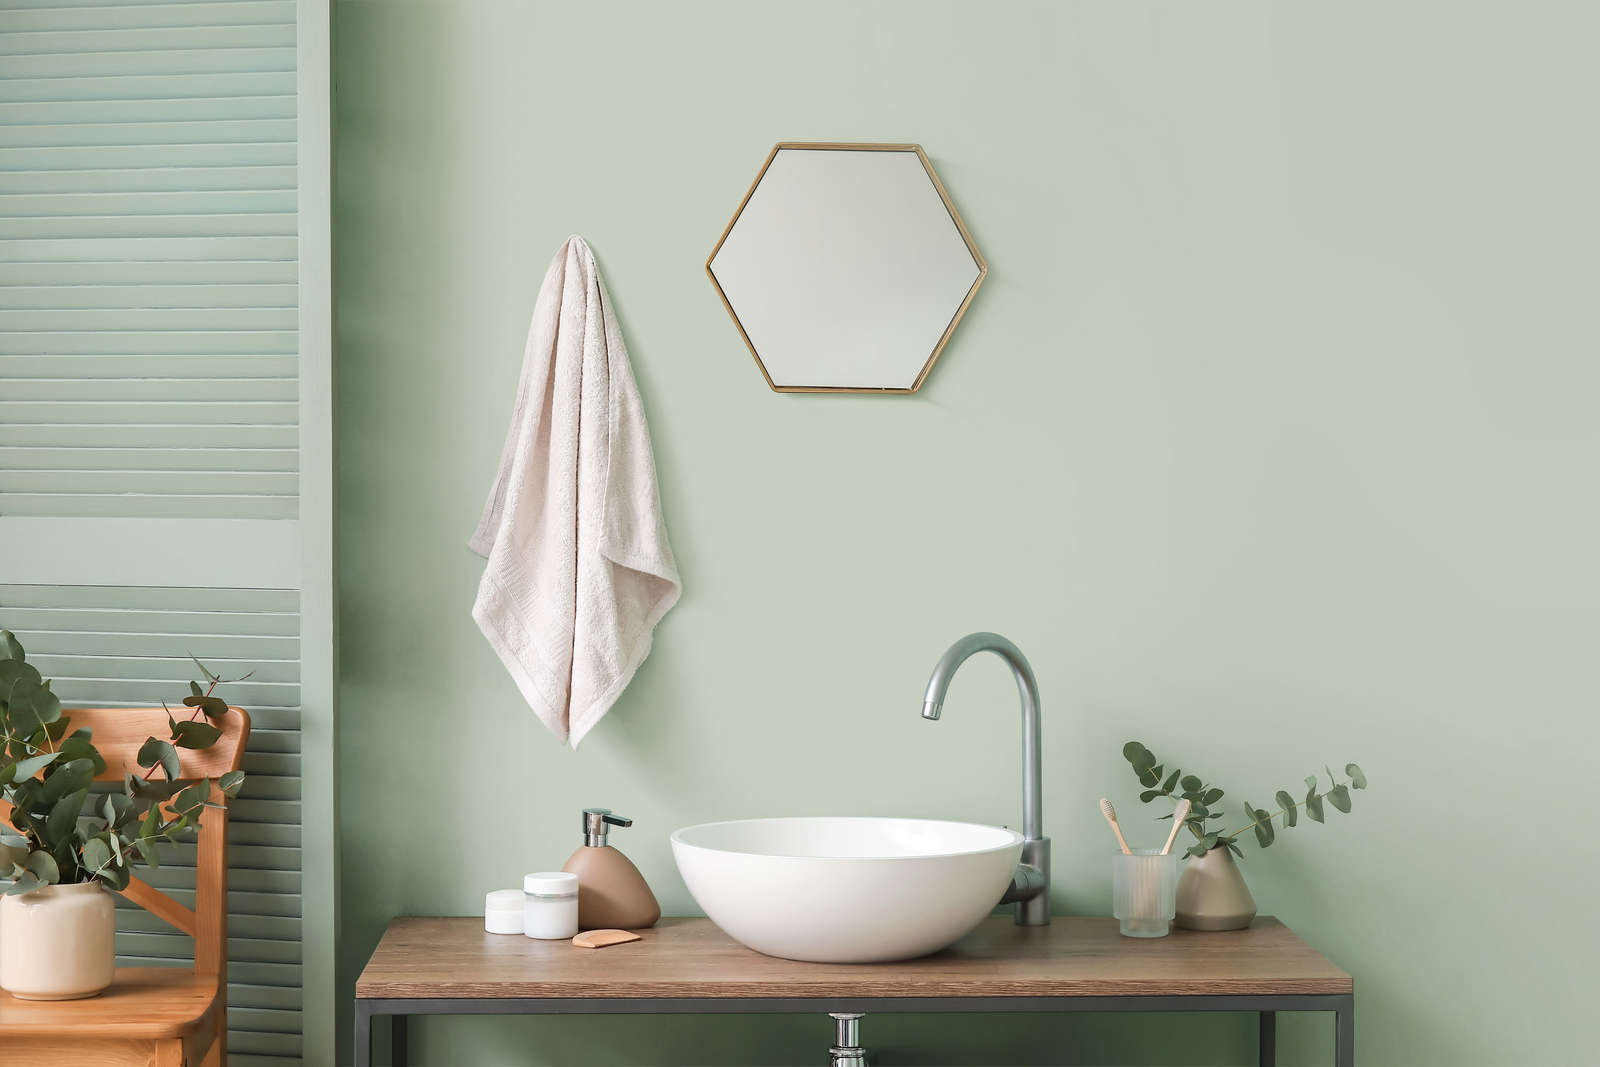             Wall Paint TCK4003 »Lovely Lime« in delicate green – 5.0 litre
        